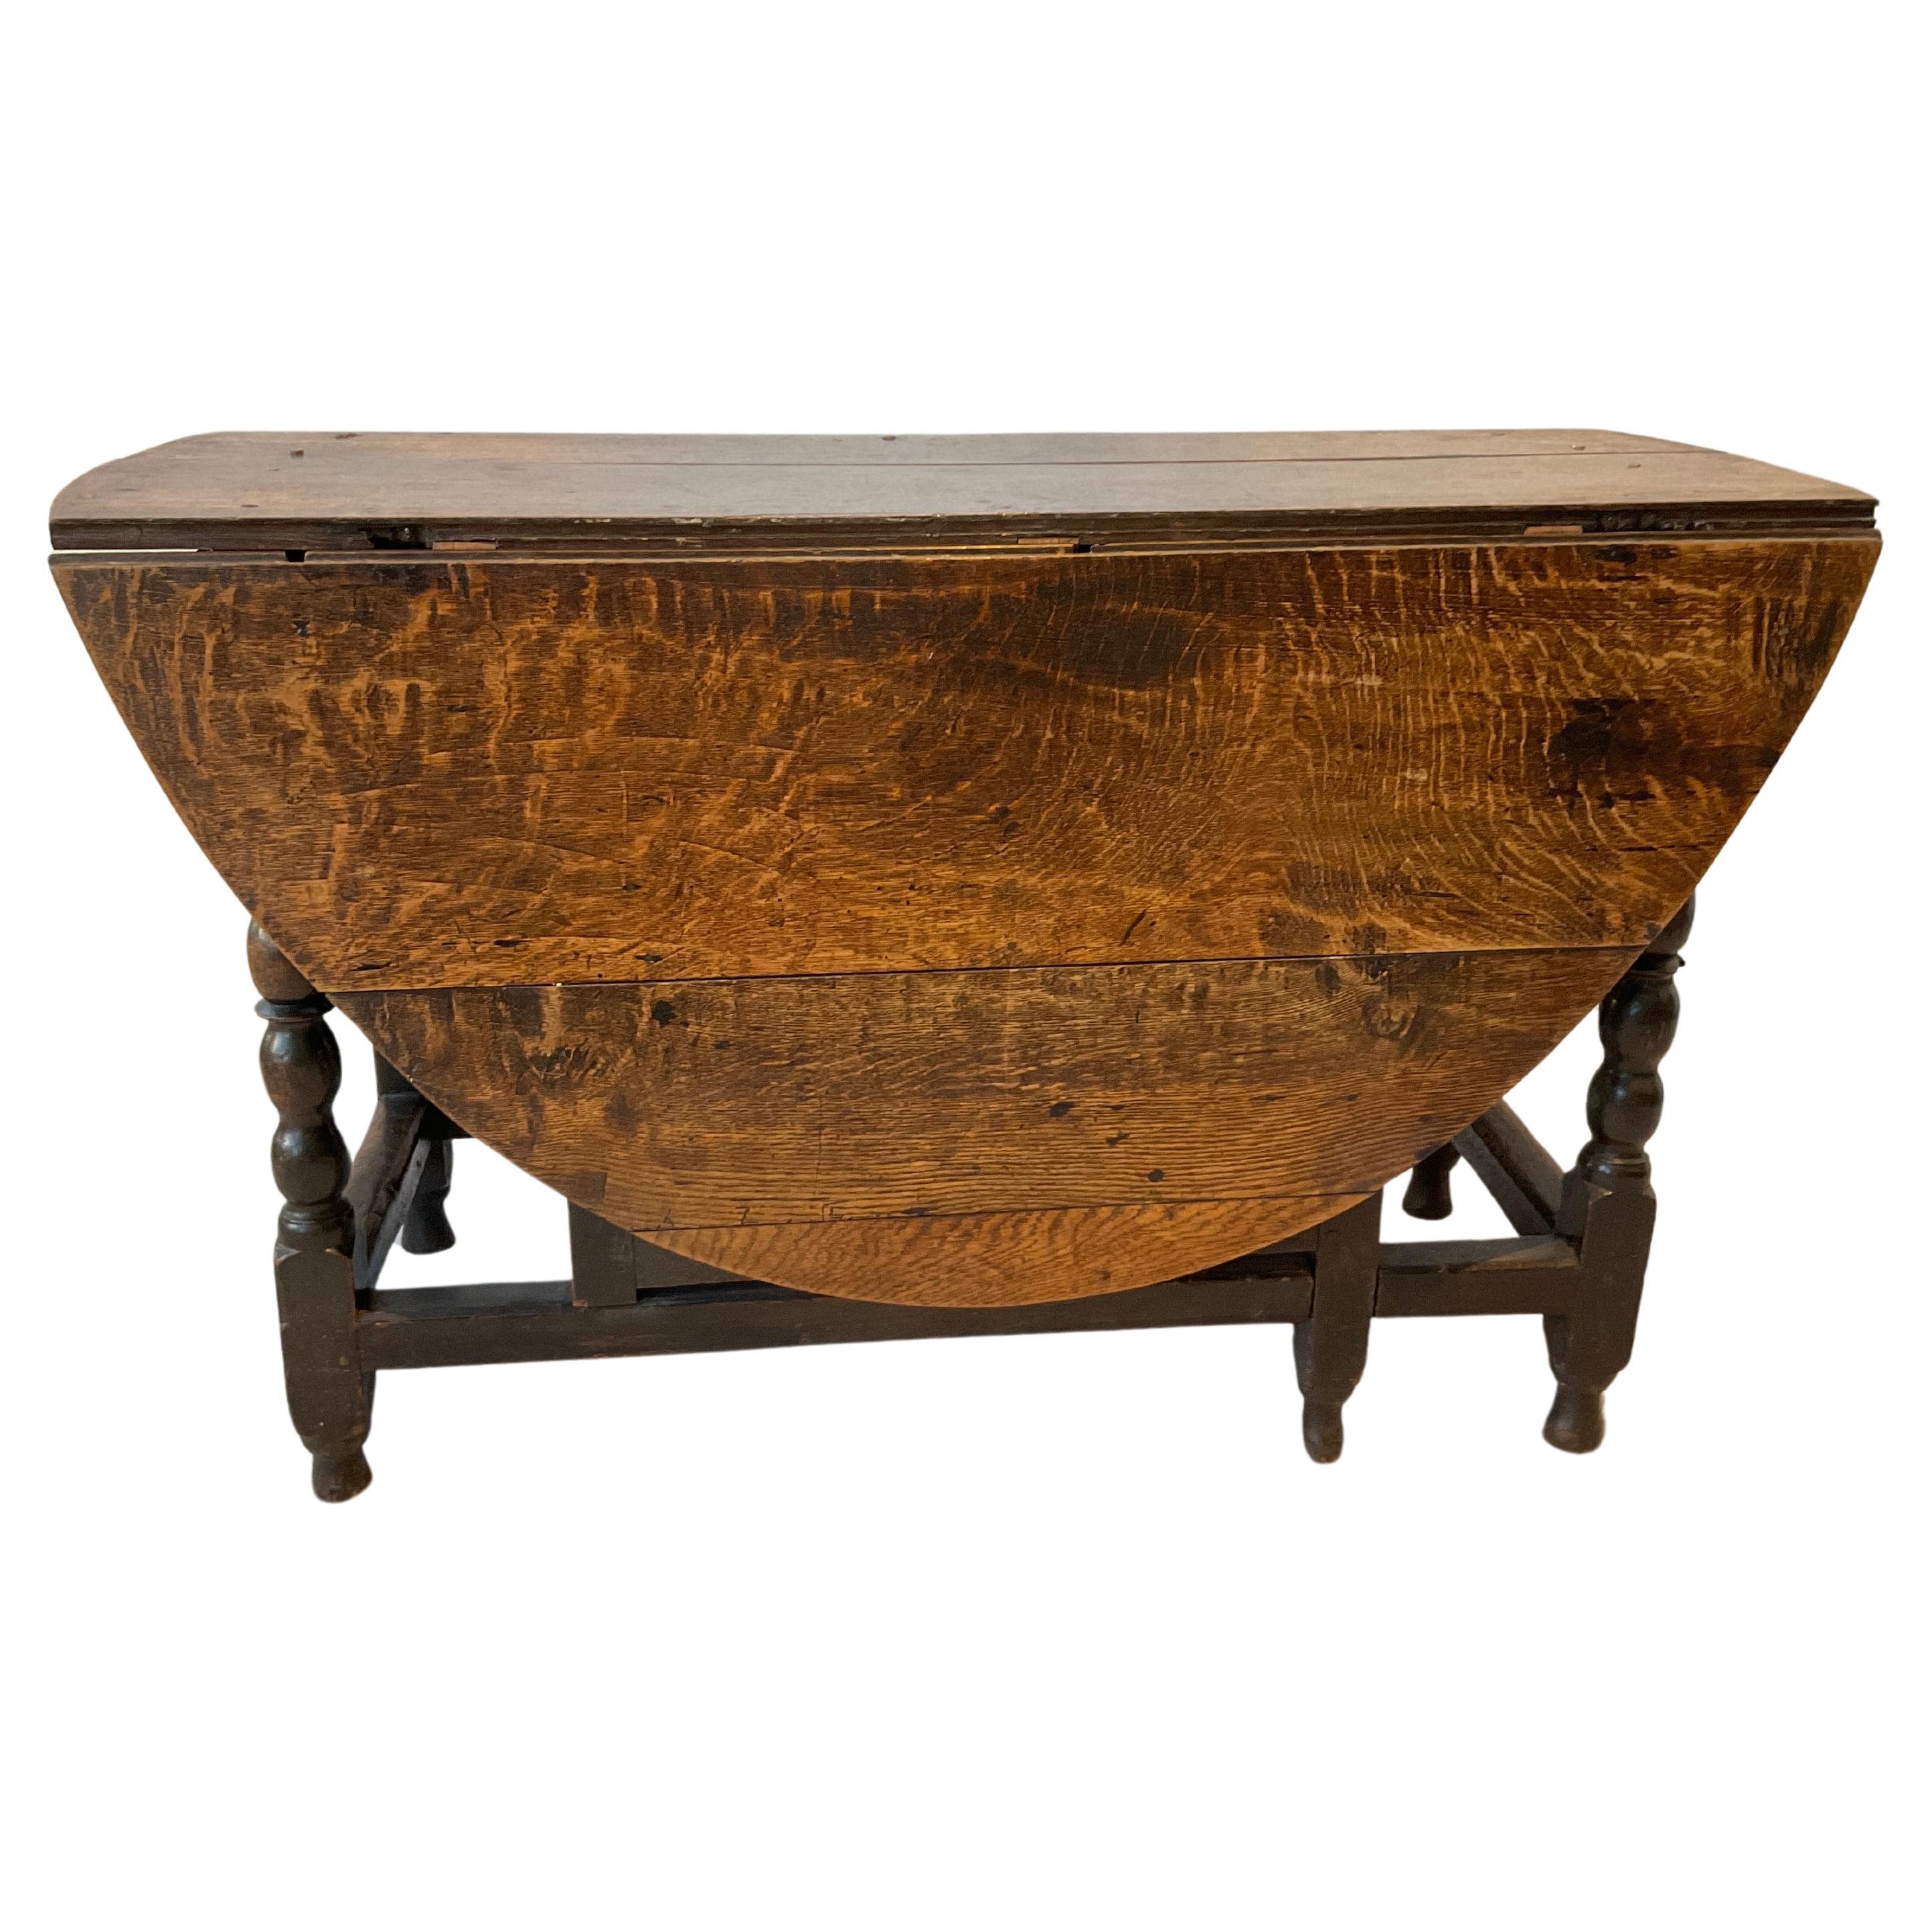 1820s English William And Mary Gateleg Table For Sale